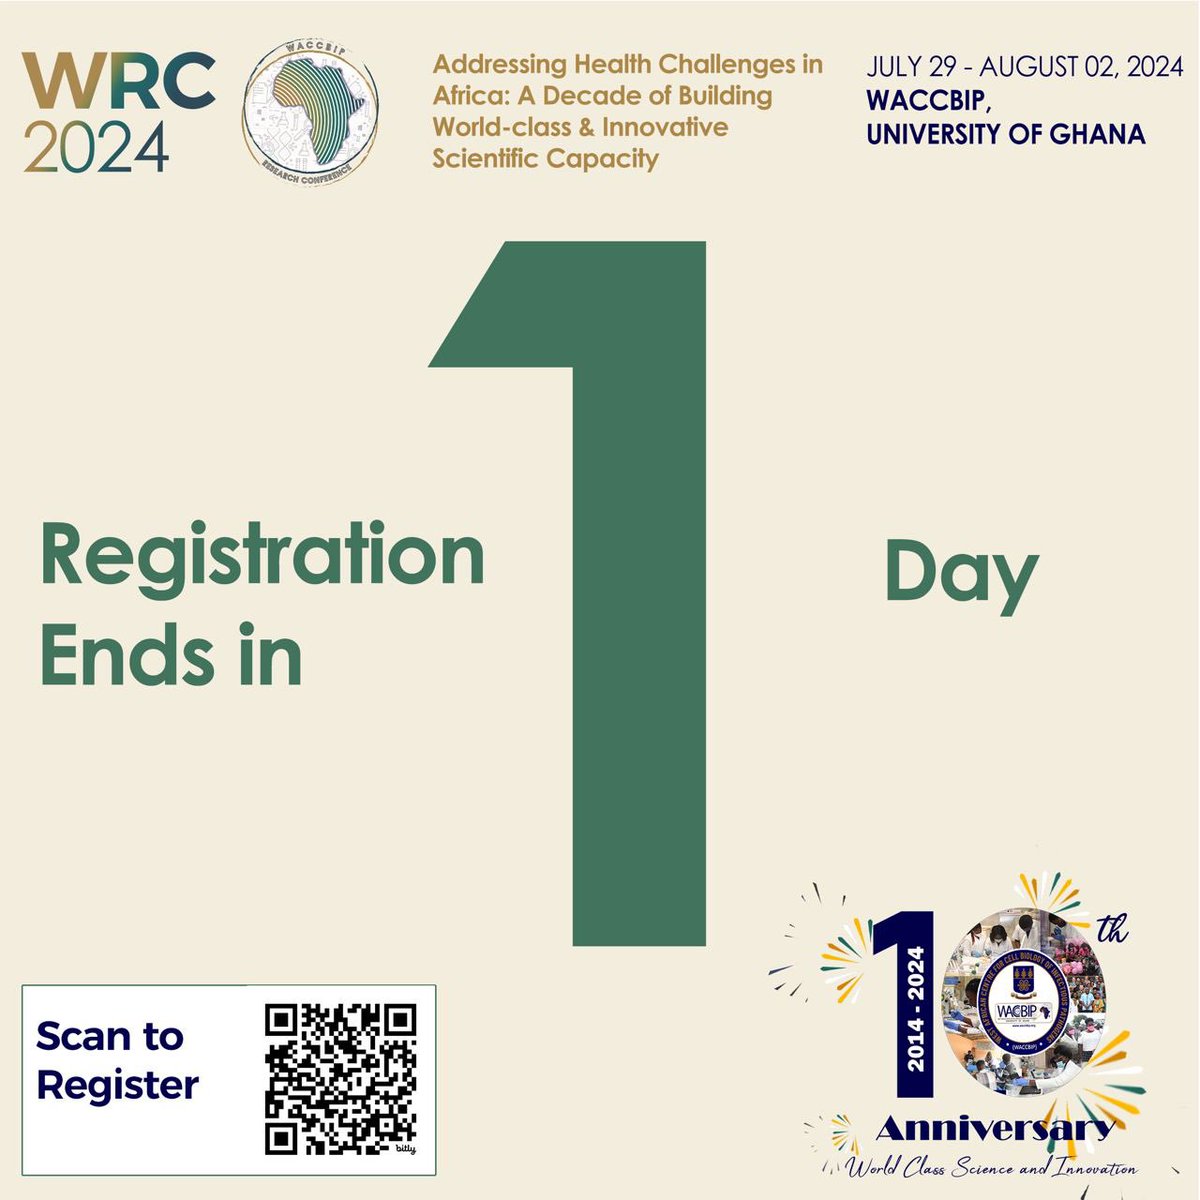 Final reminder! Tomorrow's the deadline to submit your abstract and register for the WACCBIP Research Conference. Don't miss out on this chance. 
Register now at redcap.link/WRC2024
 #WACCBIP #research #conference #deadline #WACCBIPis10